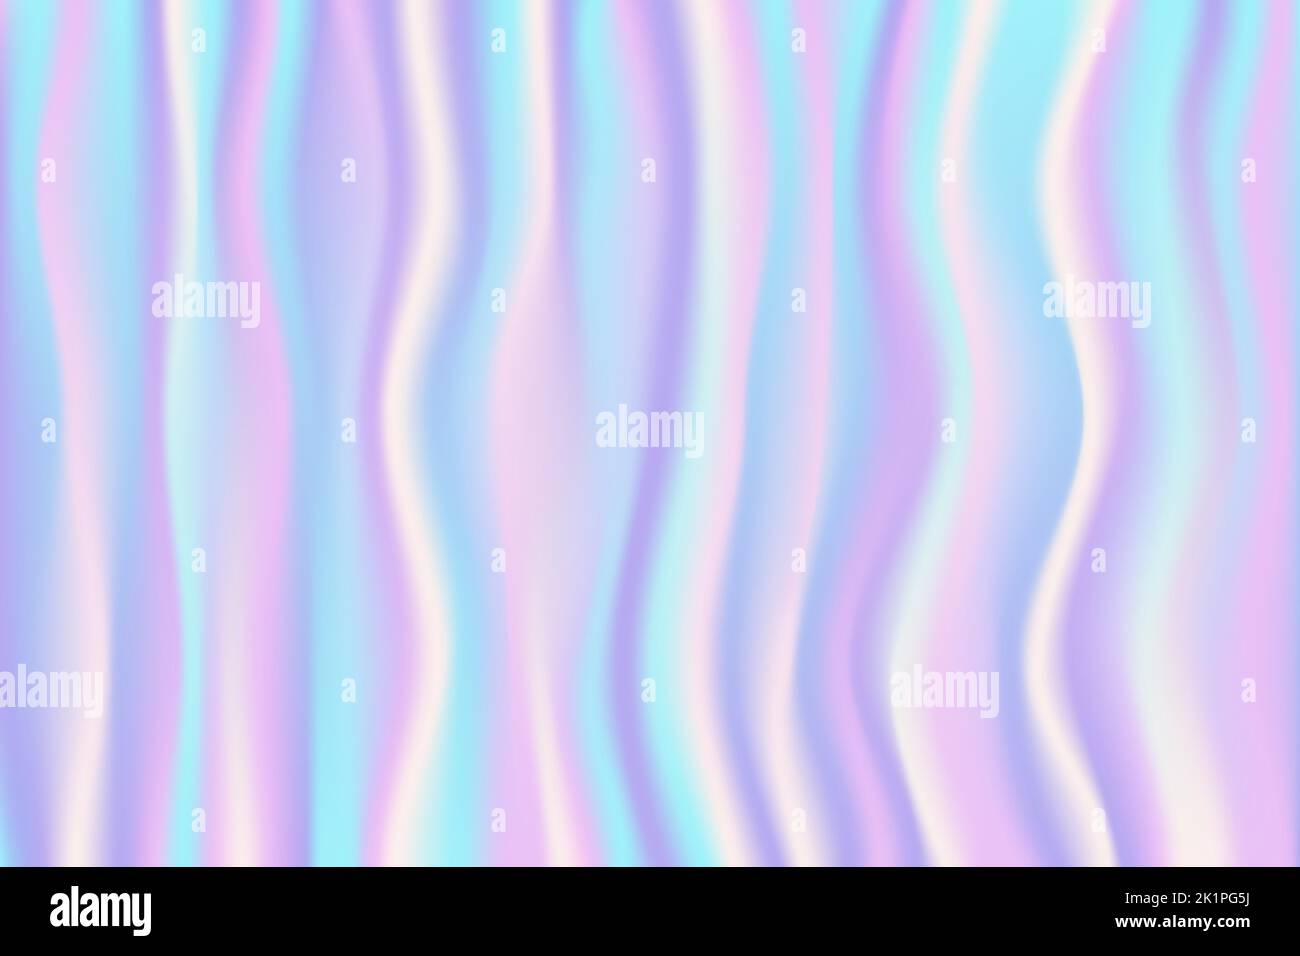 Holographic striped gradient background. Iridescent neon texture with abstract pattern. Rainbow unicorn wallpaper. Vector illustration. Stock Vector